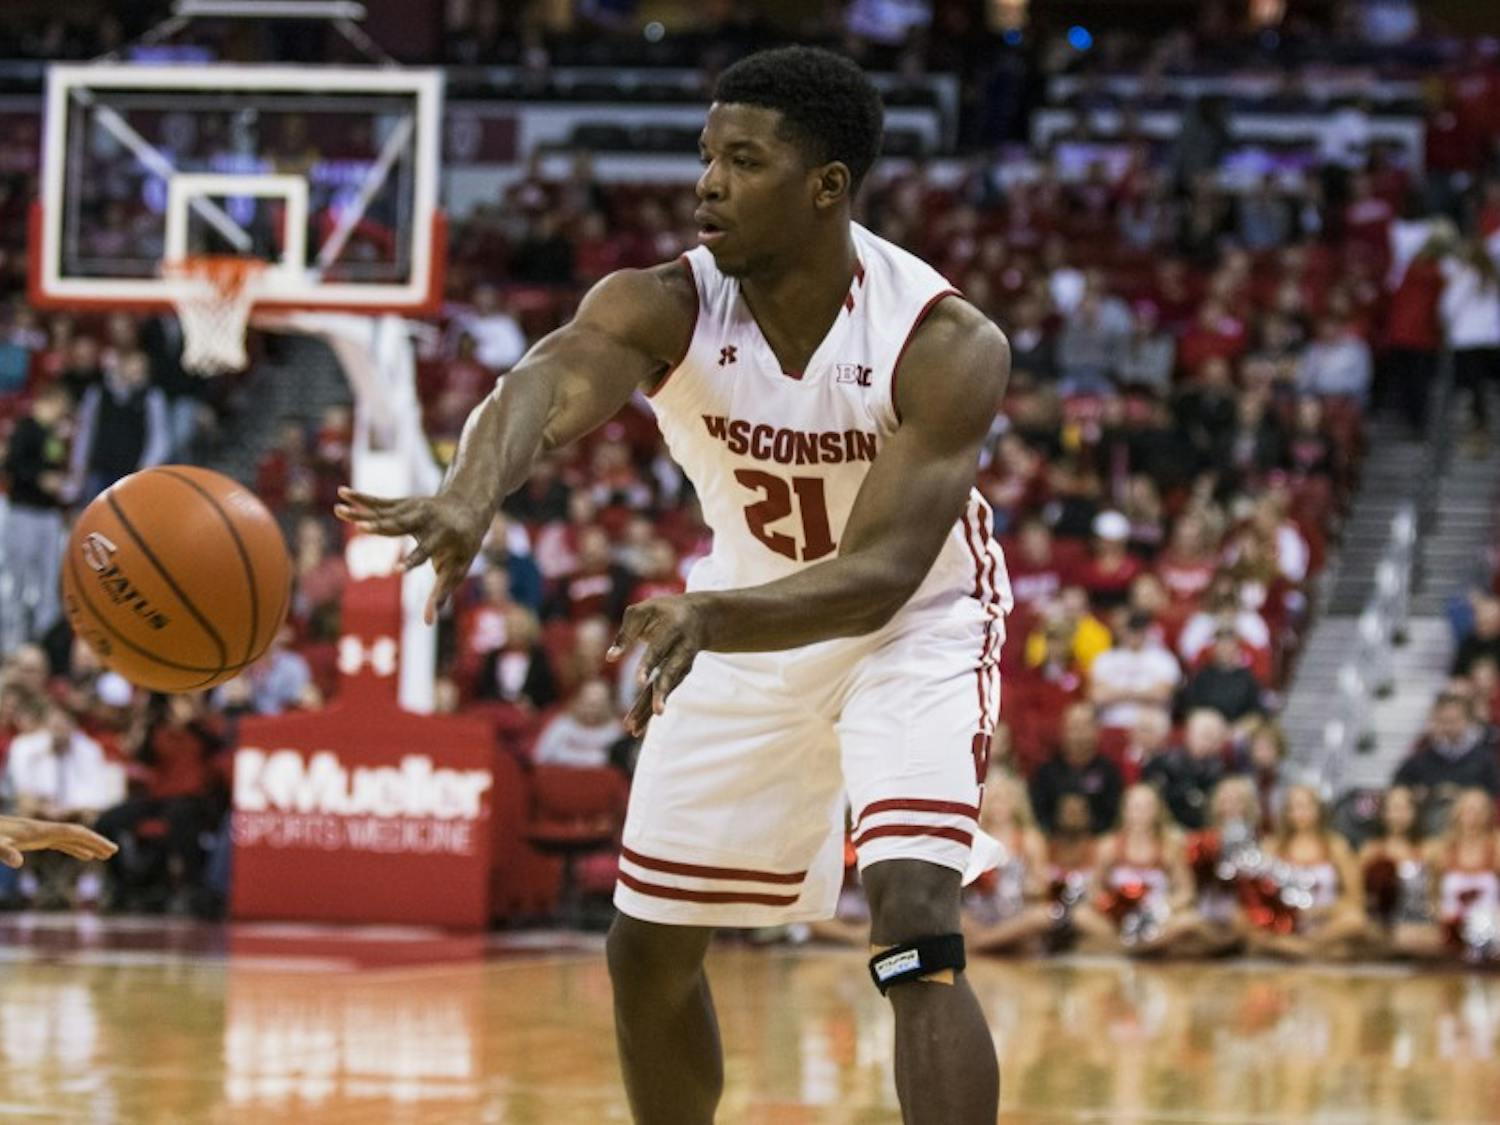 Khalil Iverson scored a season-high 16 points and lead the Badgers back in the second half against Illinois Monday night.